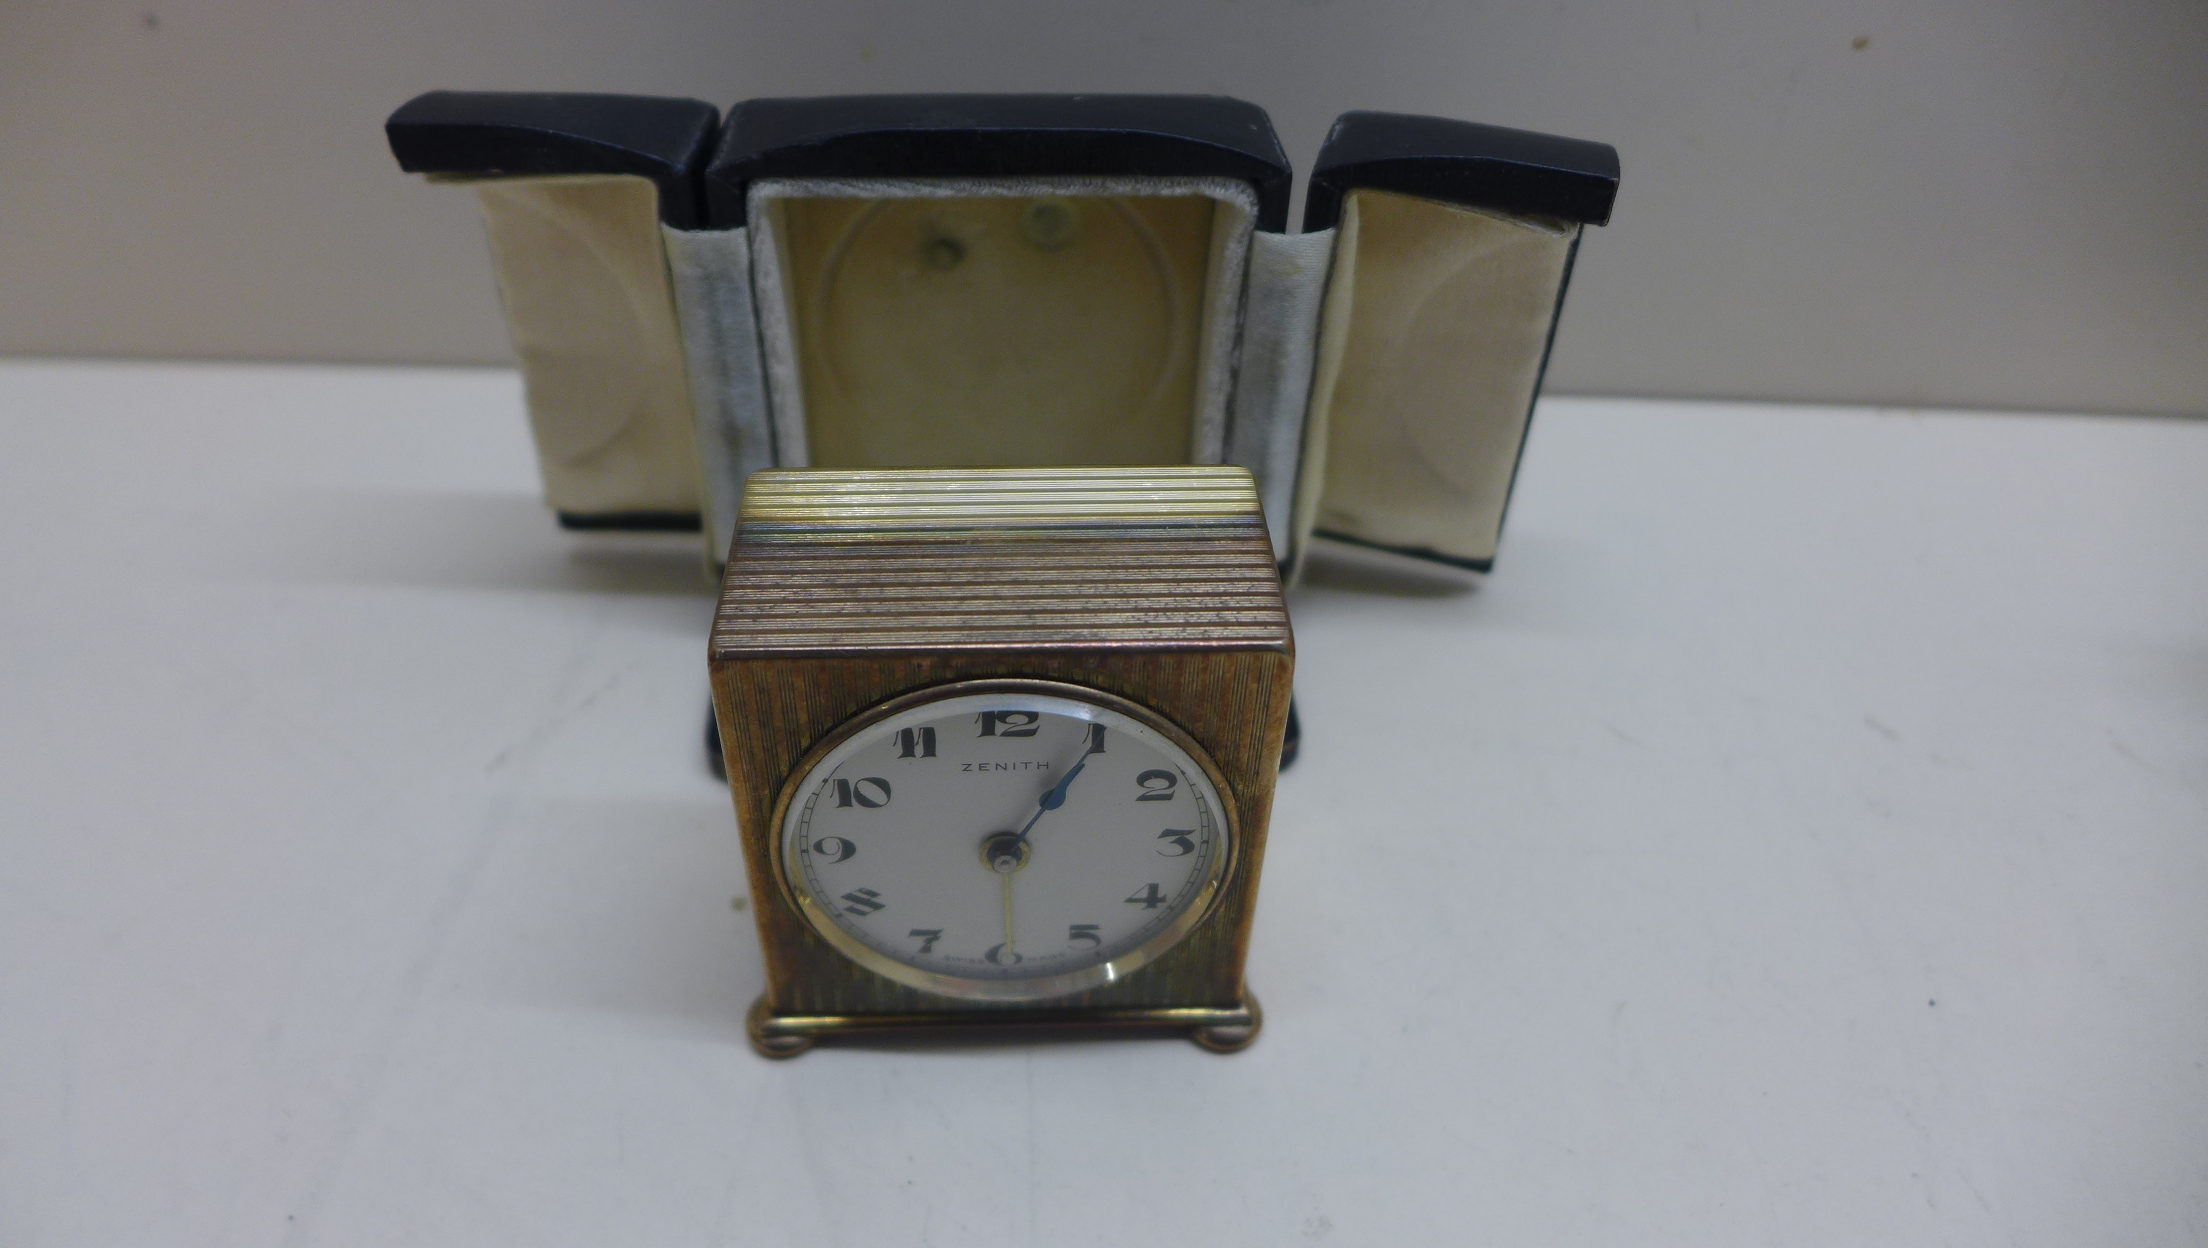 A Zenith travel alarm clock with outer case with a 4cm dial, running in saleroom.